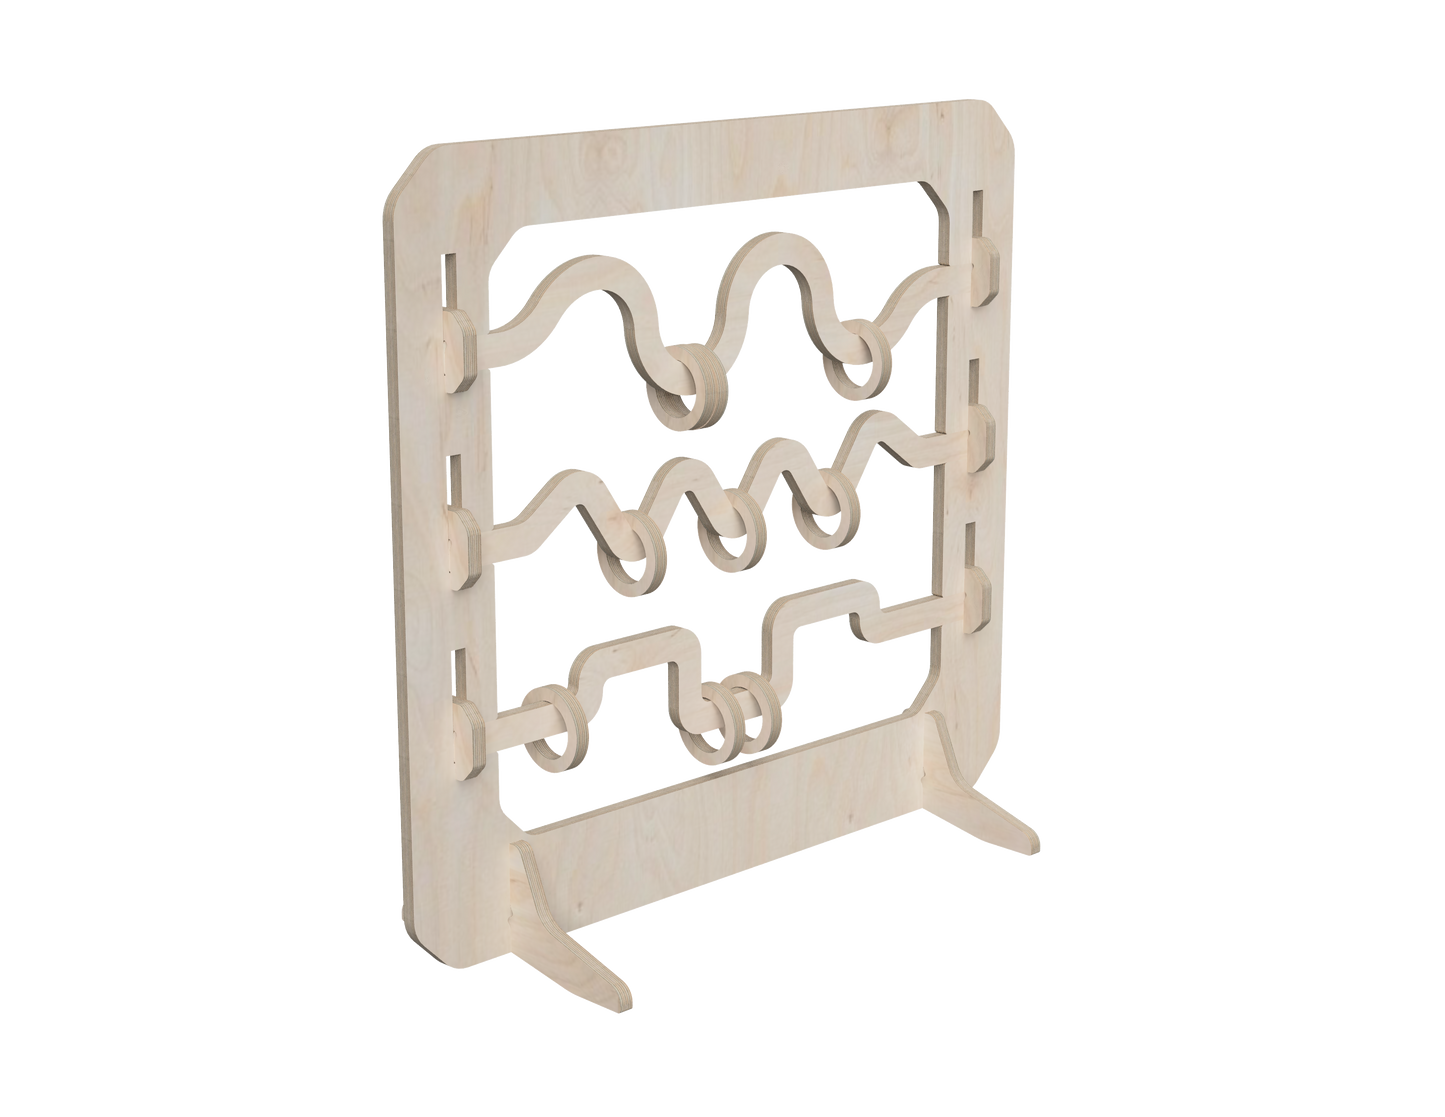 Interactive Fence DXF file